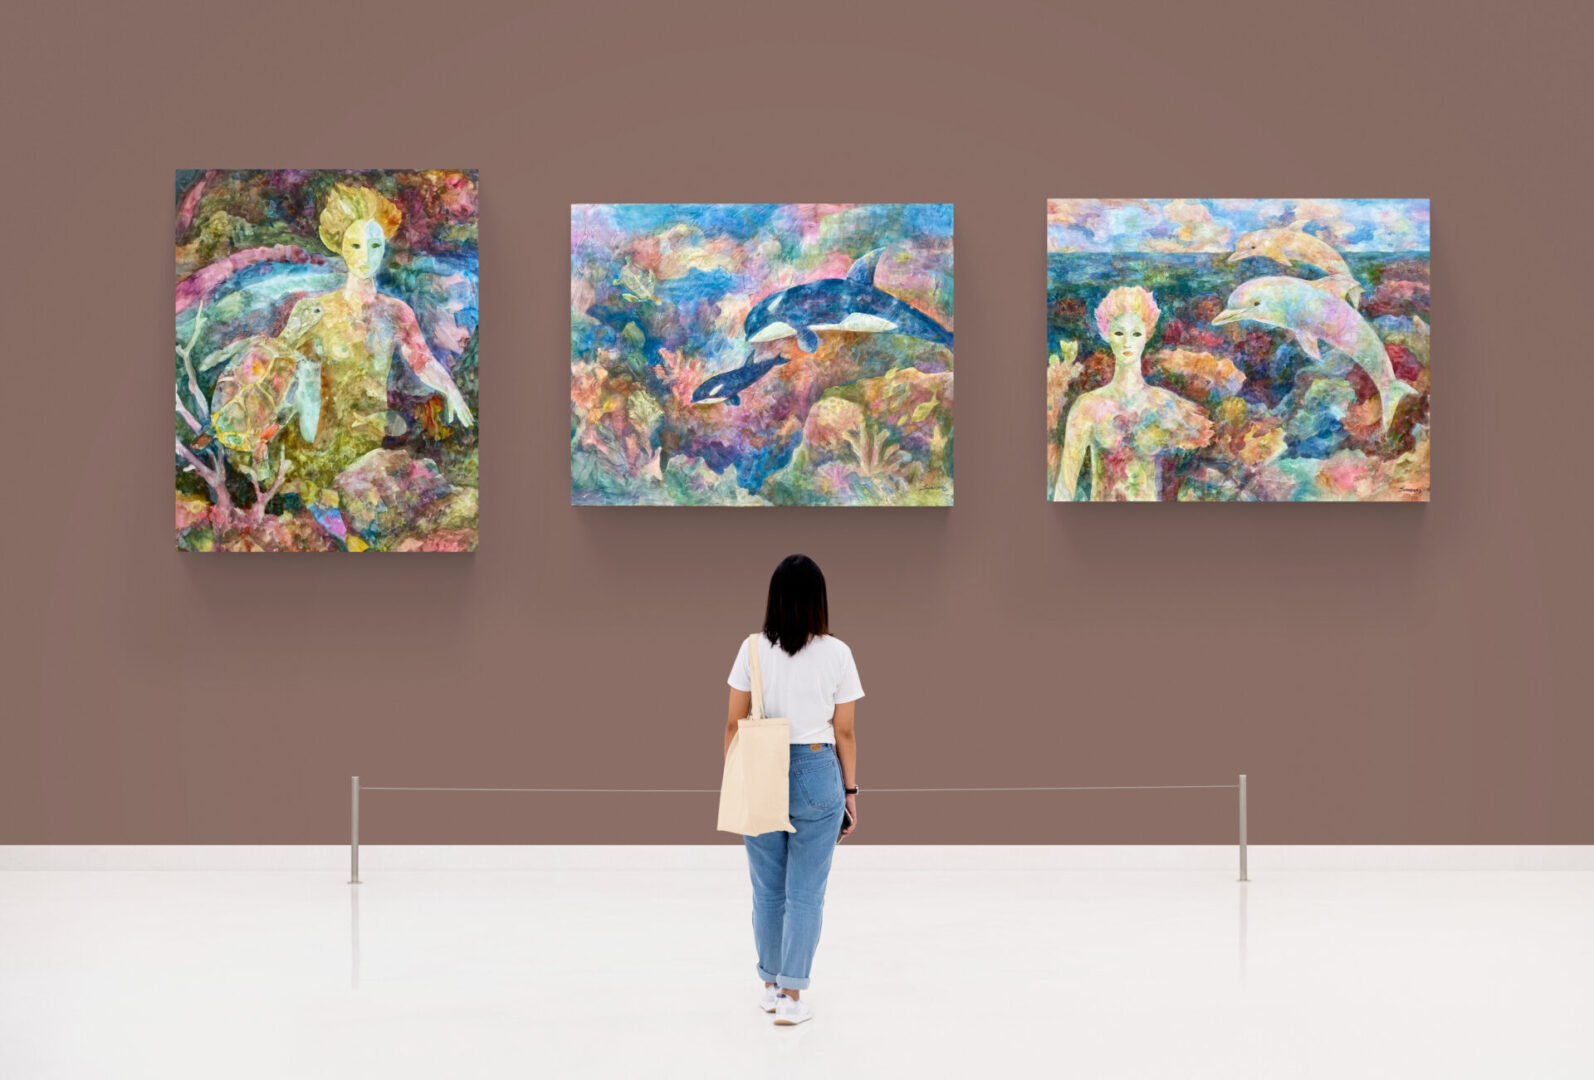 A woman admiring three paintings in a local art gallery featuring fine art for sale.